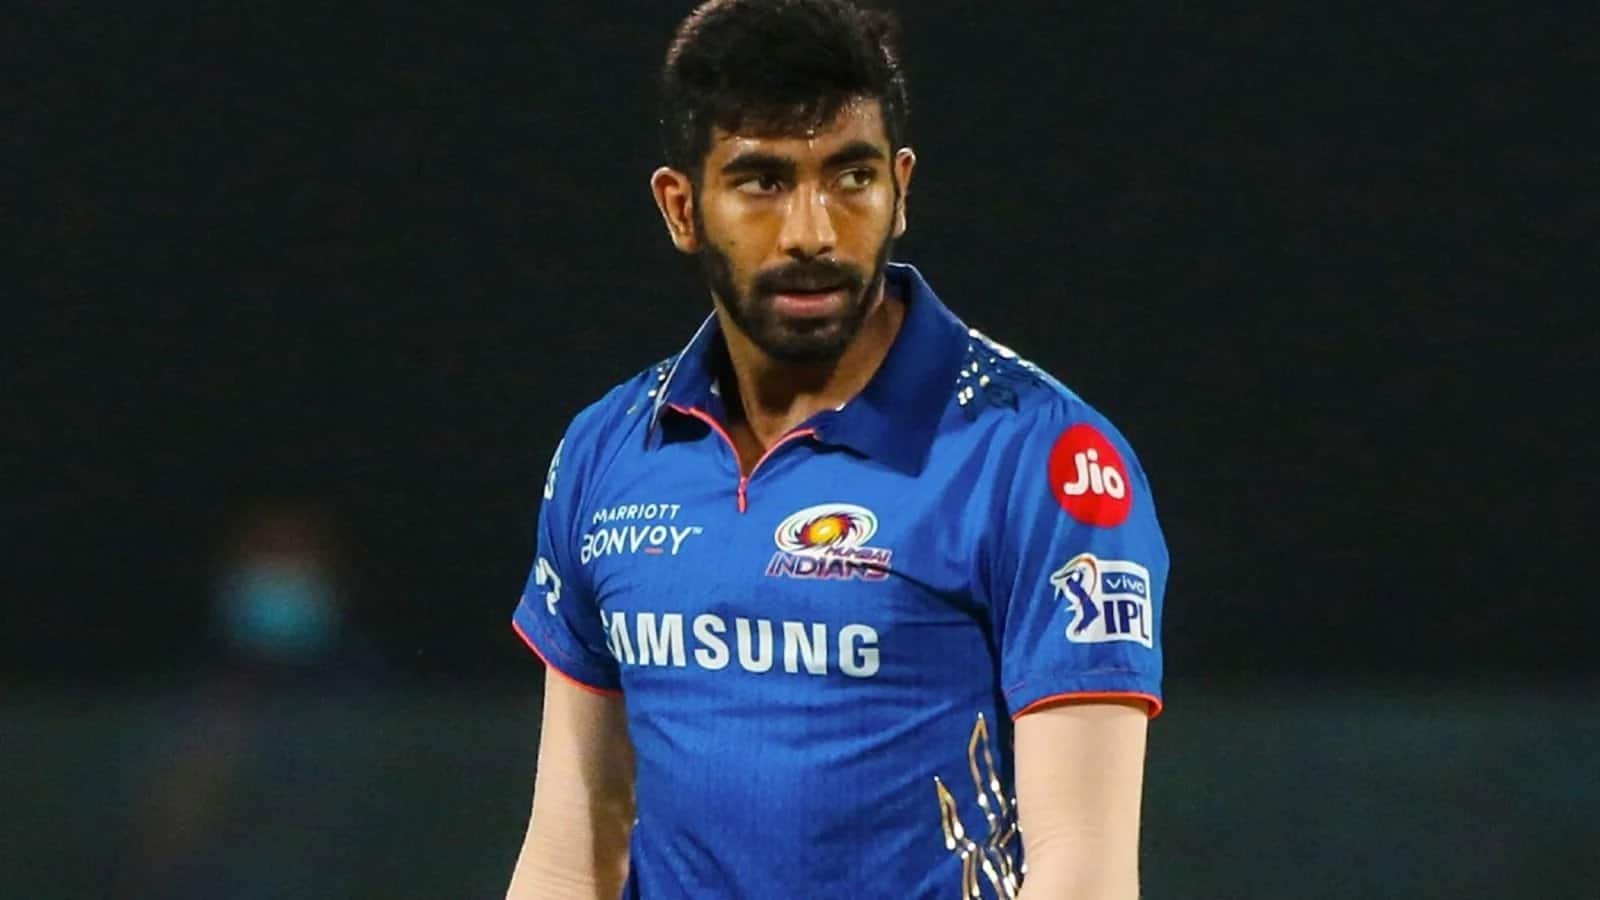 Jasprit Bumrah is among the highest-paid players in this particular position (X.com)